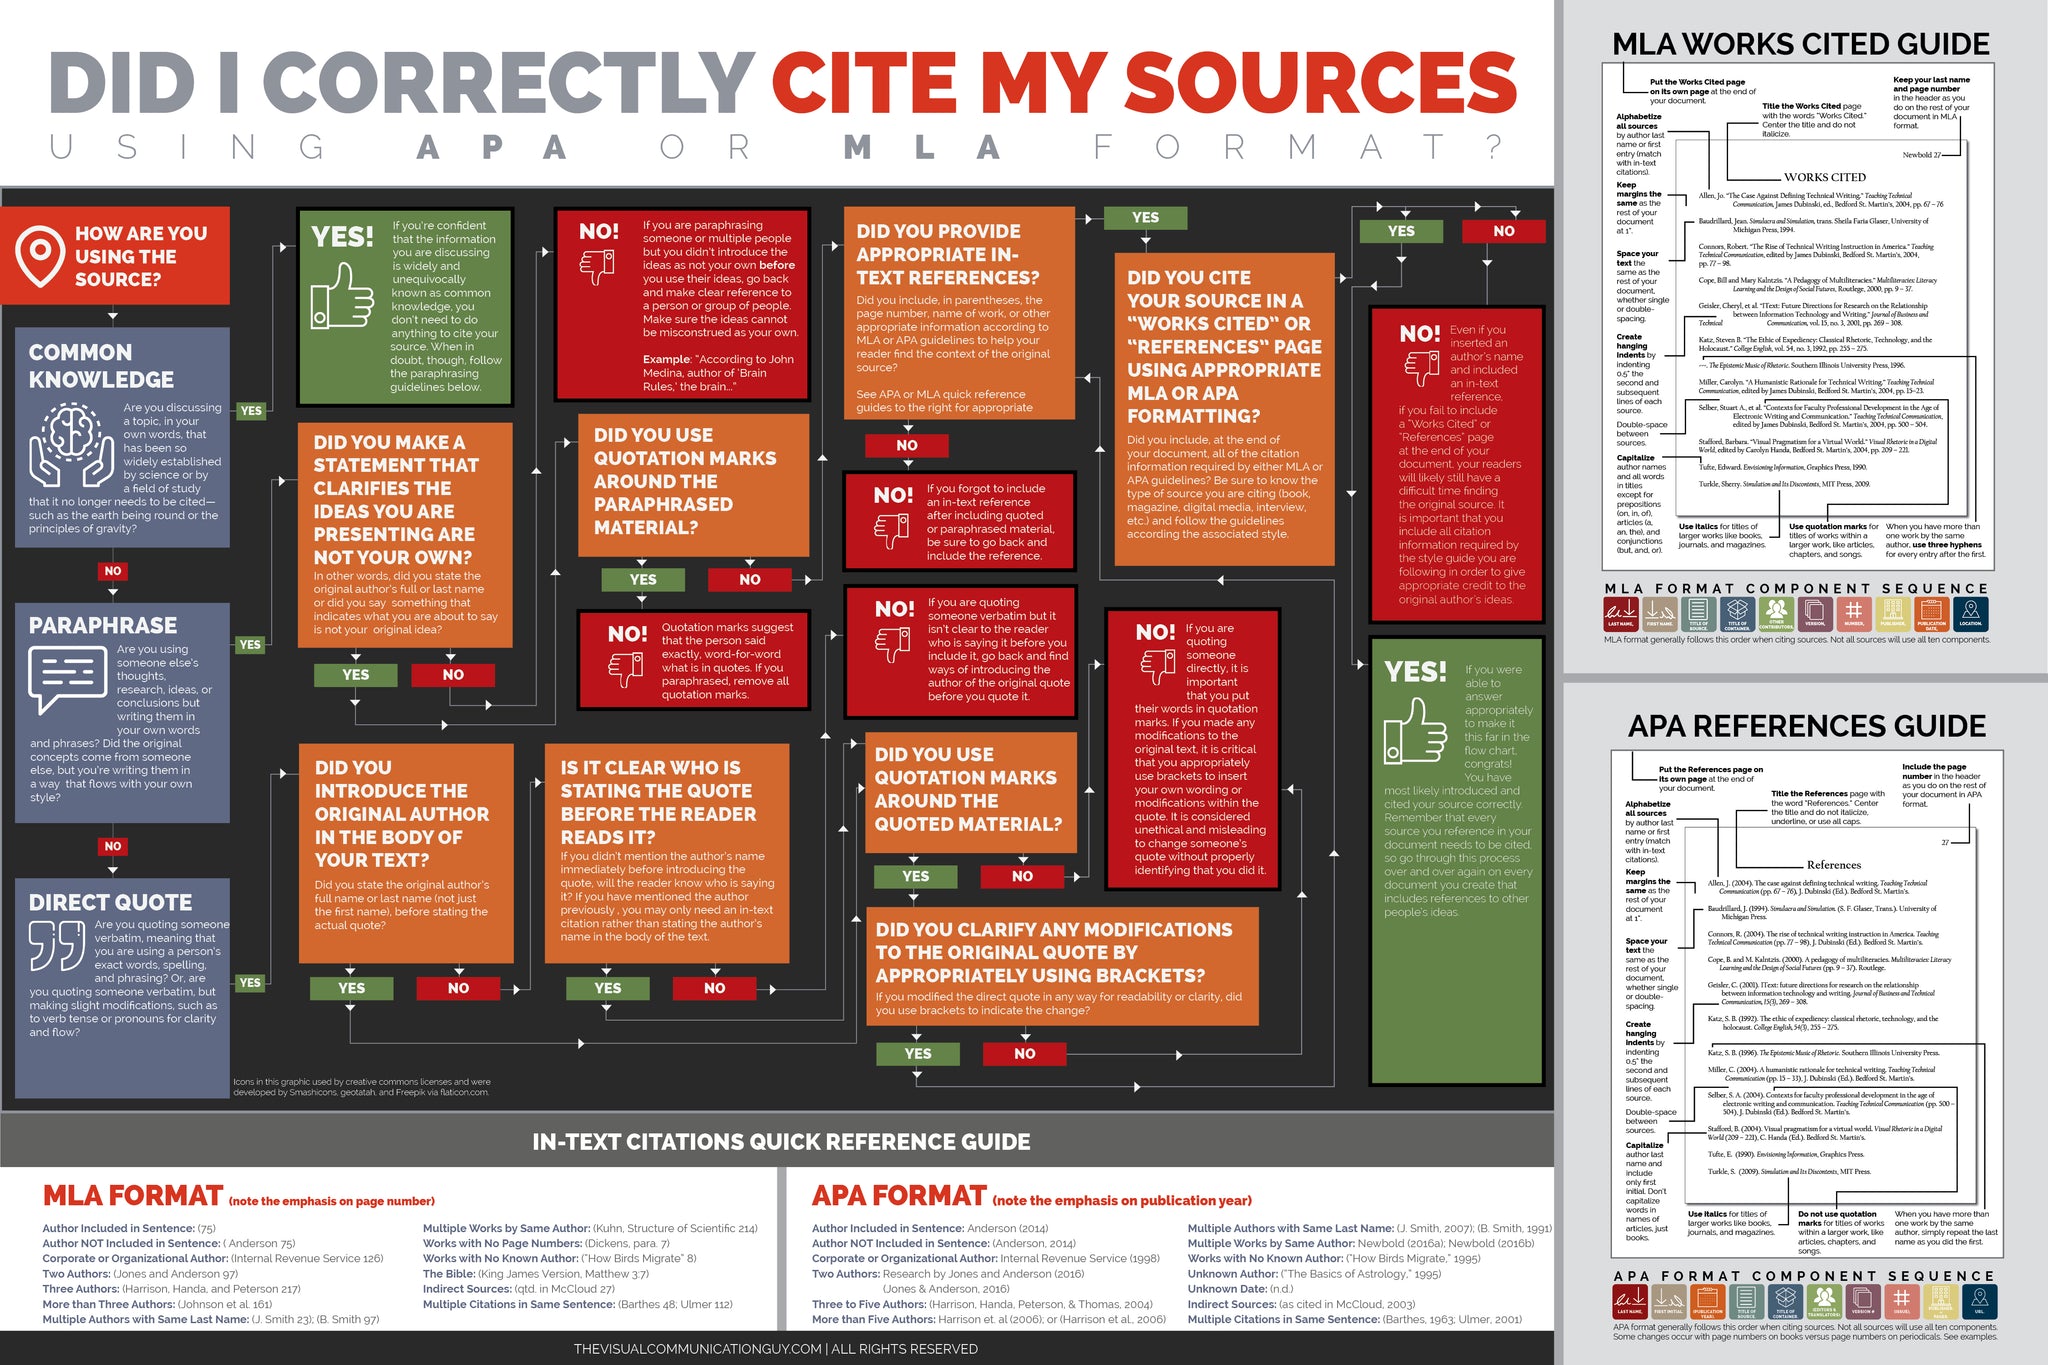 Did I Correctly Cite My Sources? 20x30 Poster Print